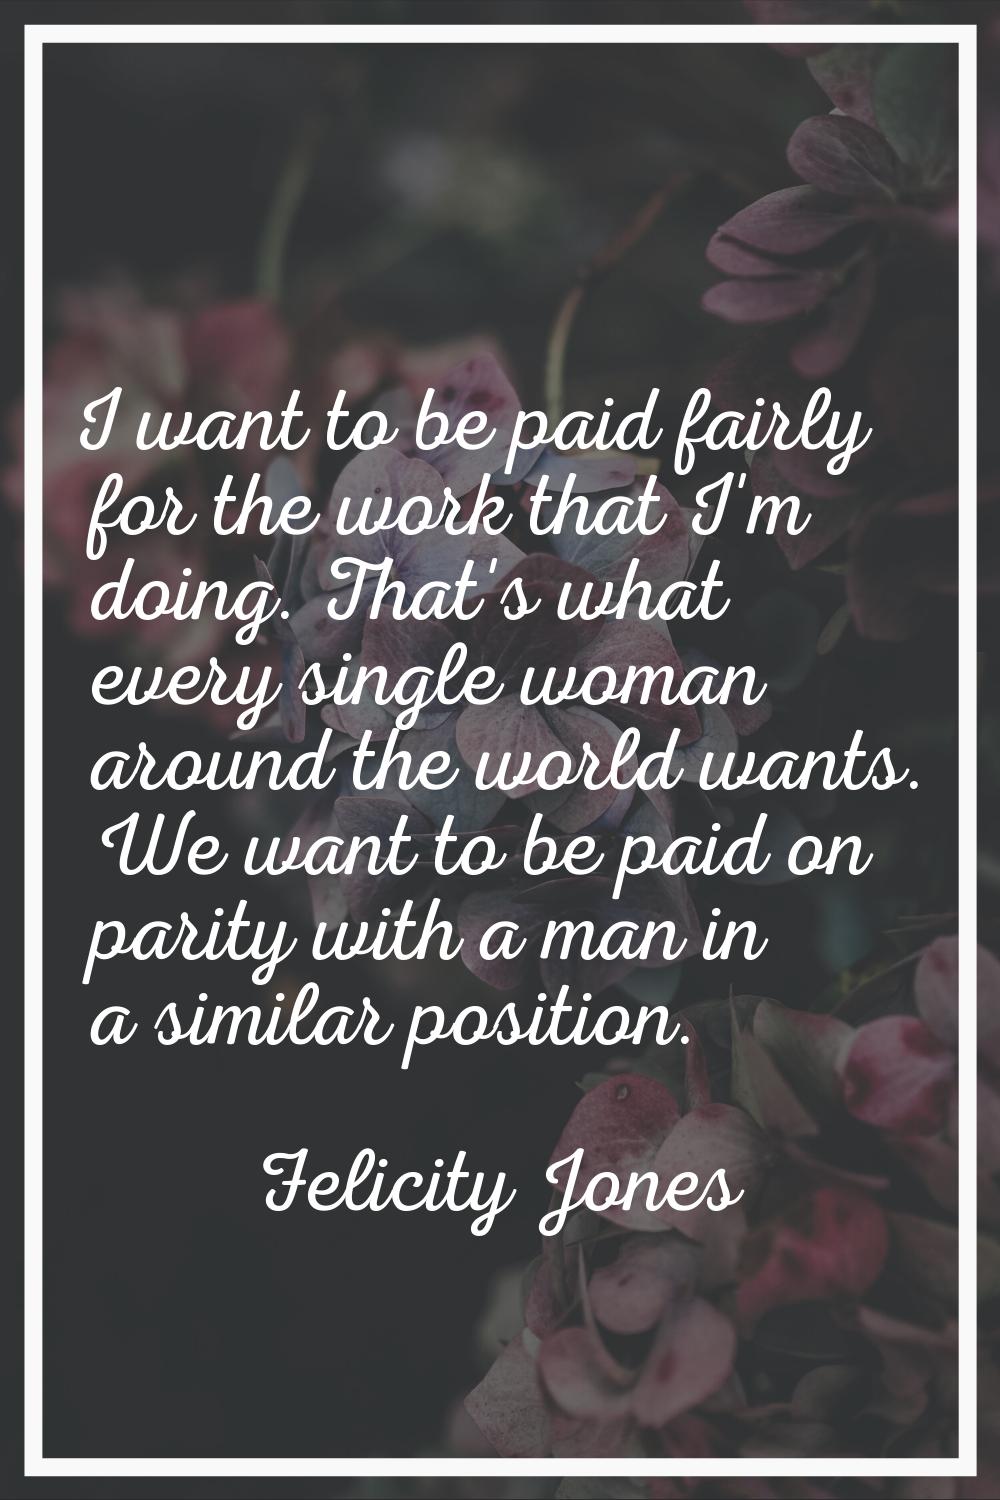 I want to be paid fairly for the work that I'm doing. That's what every single woman around the wor